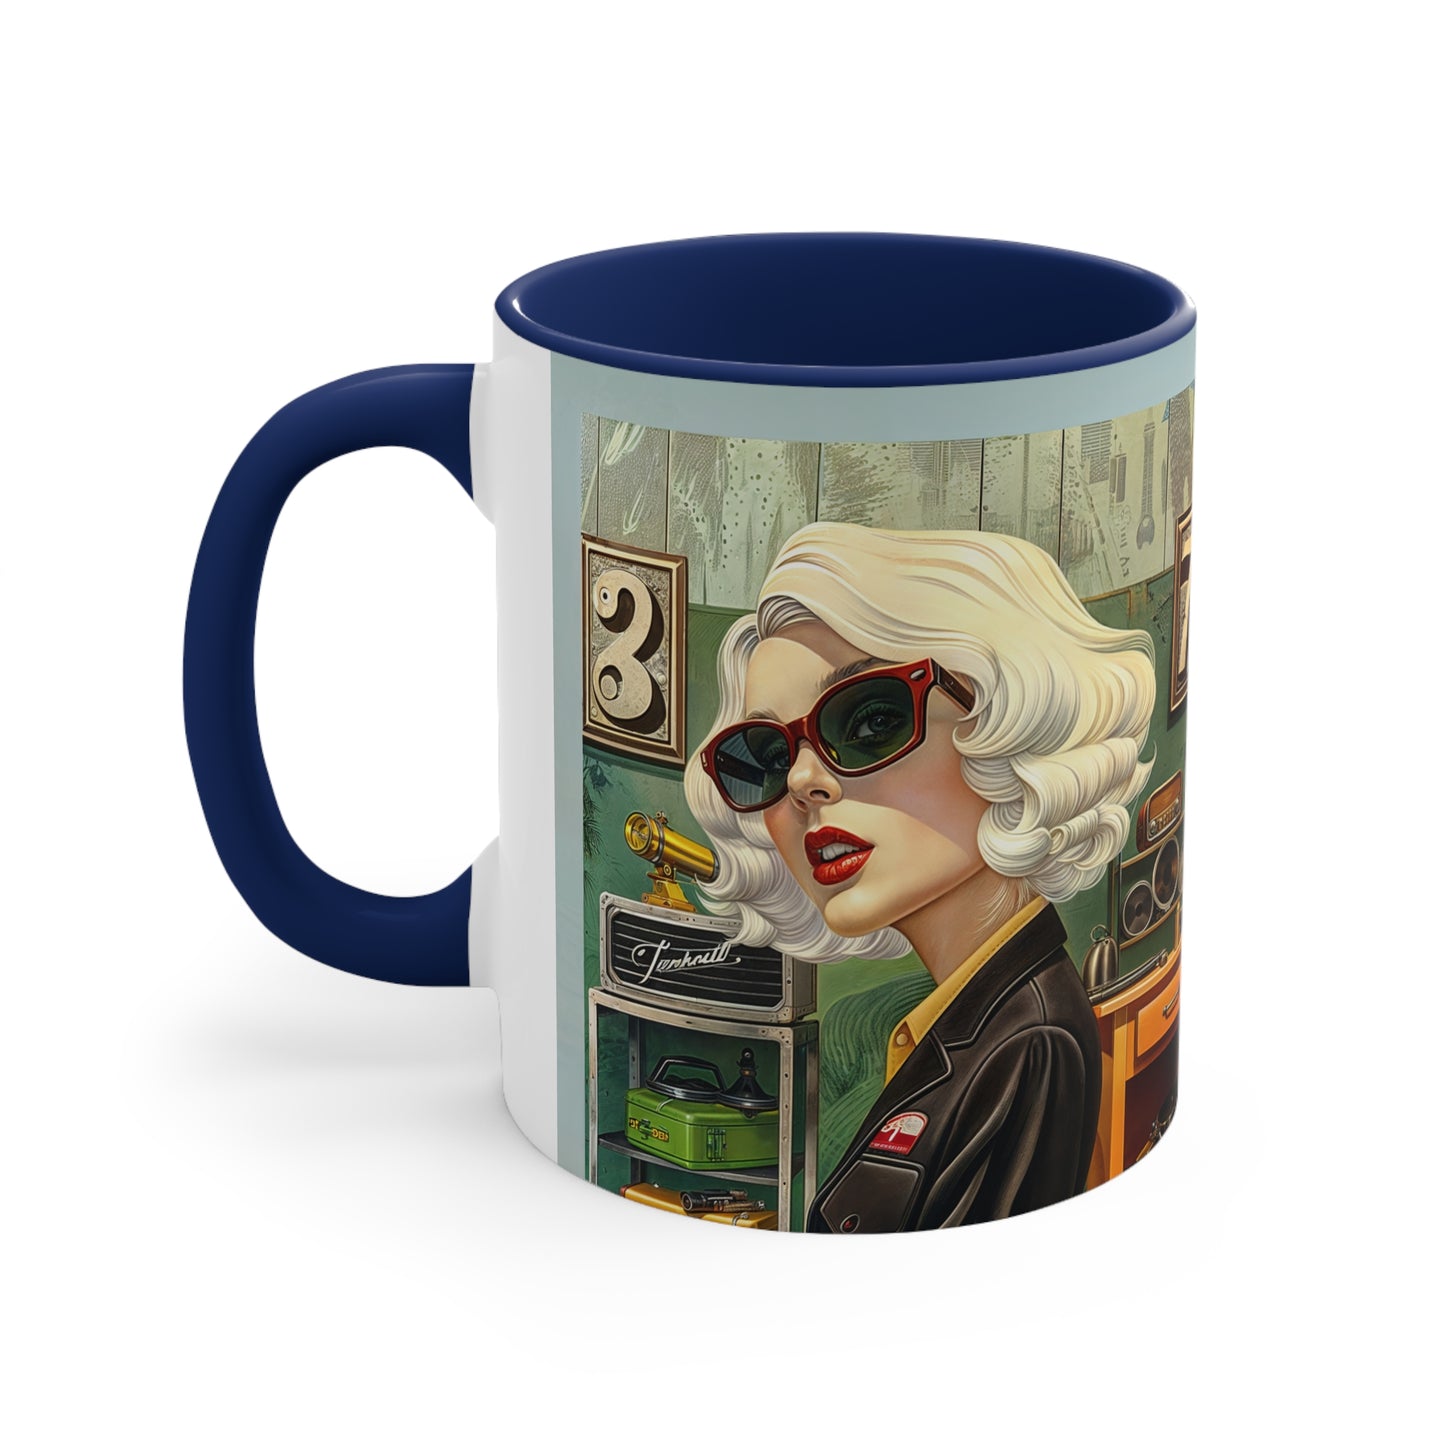 Accent Coffee Mug, 11oz - Tool Time Blonde-navy side